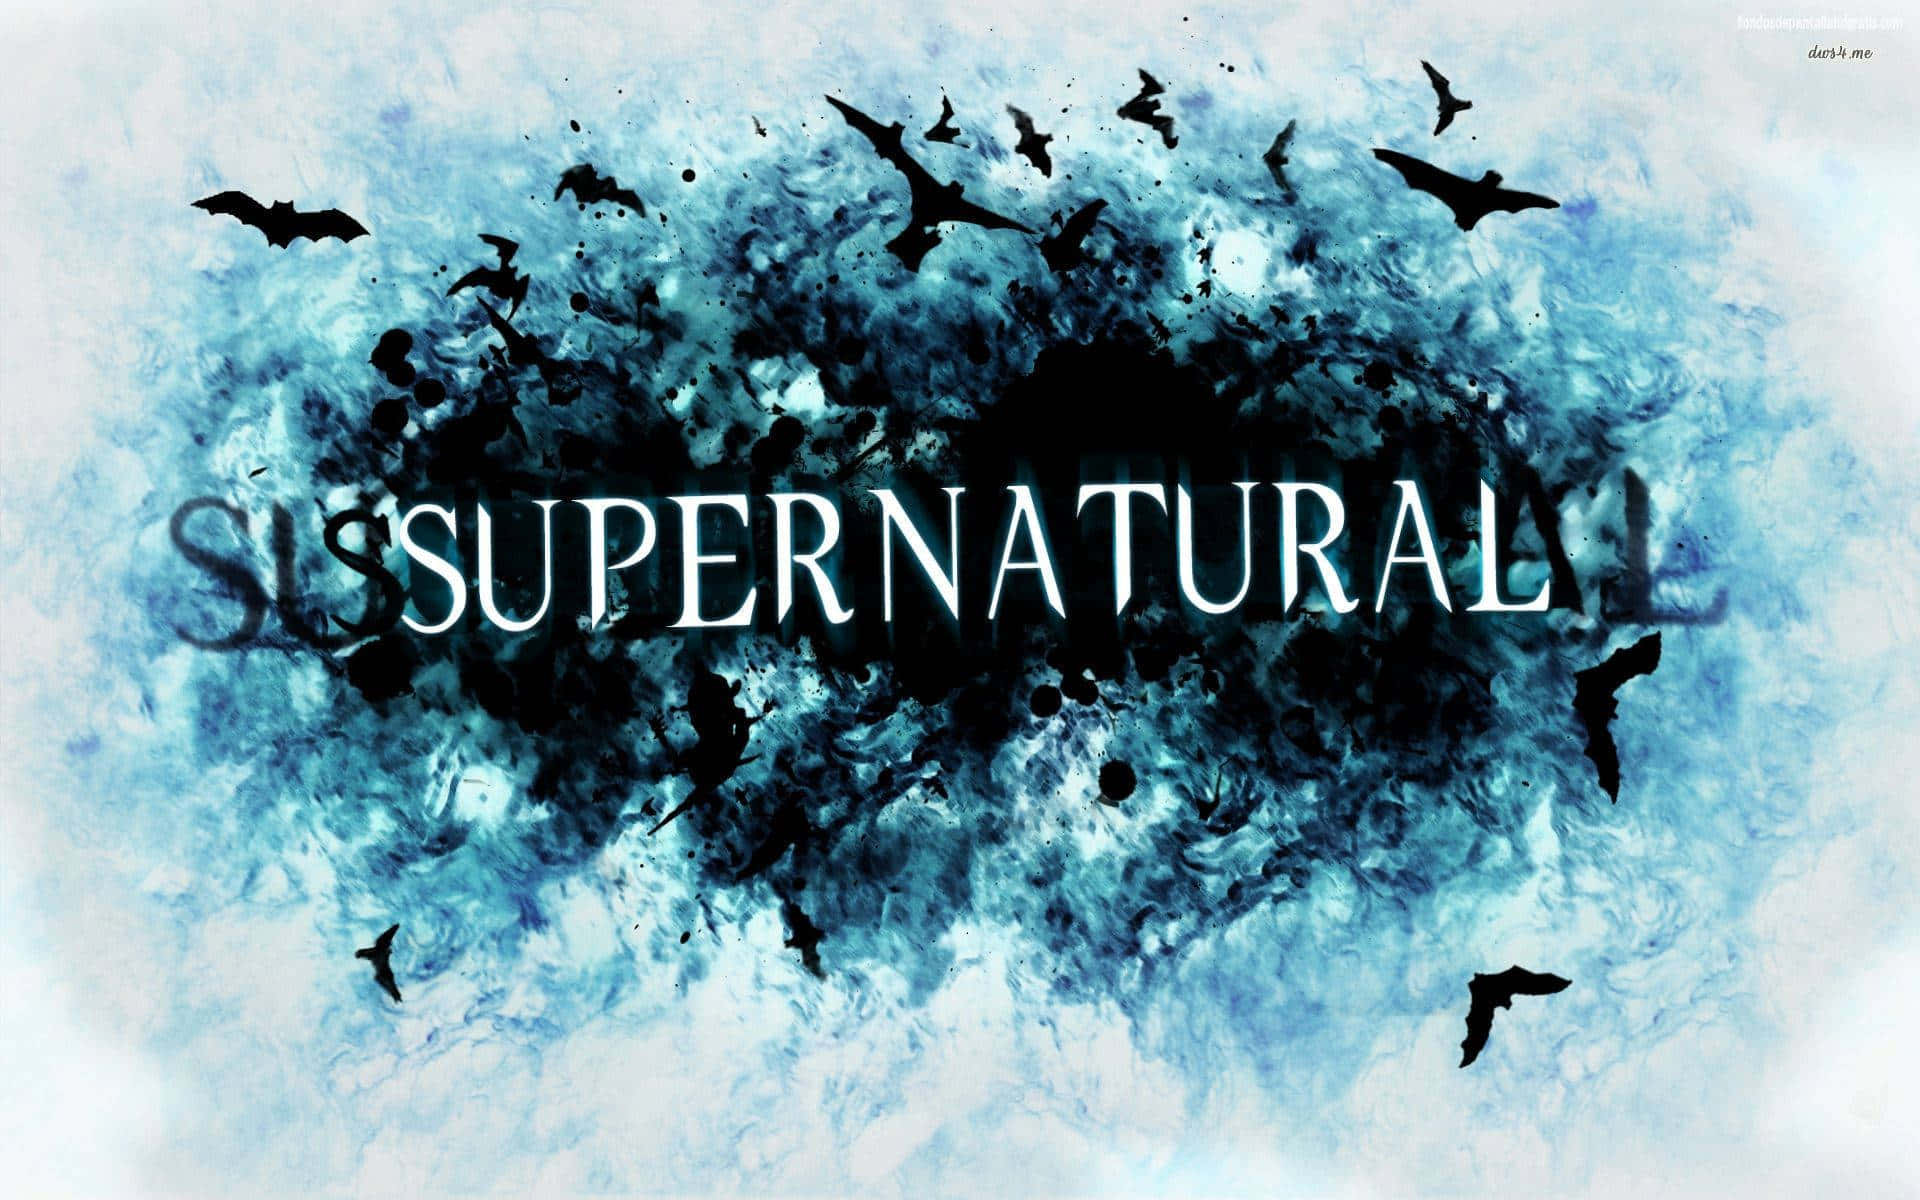 A surreal rendition of the iconic Winchester brothers from Supernatural Wallpaper